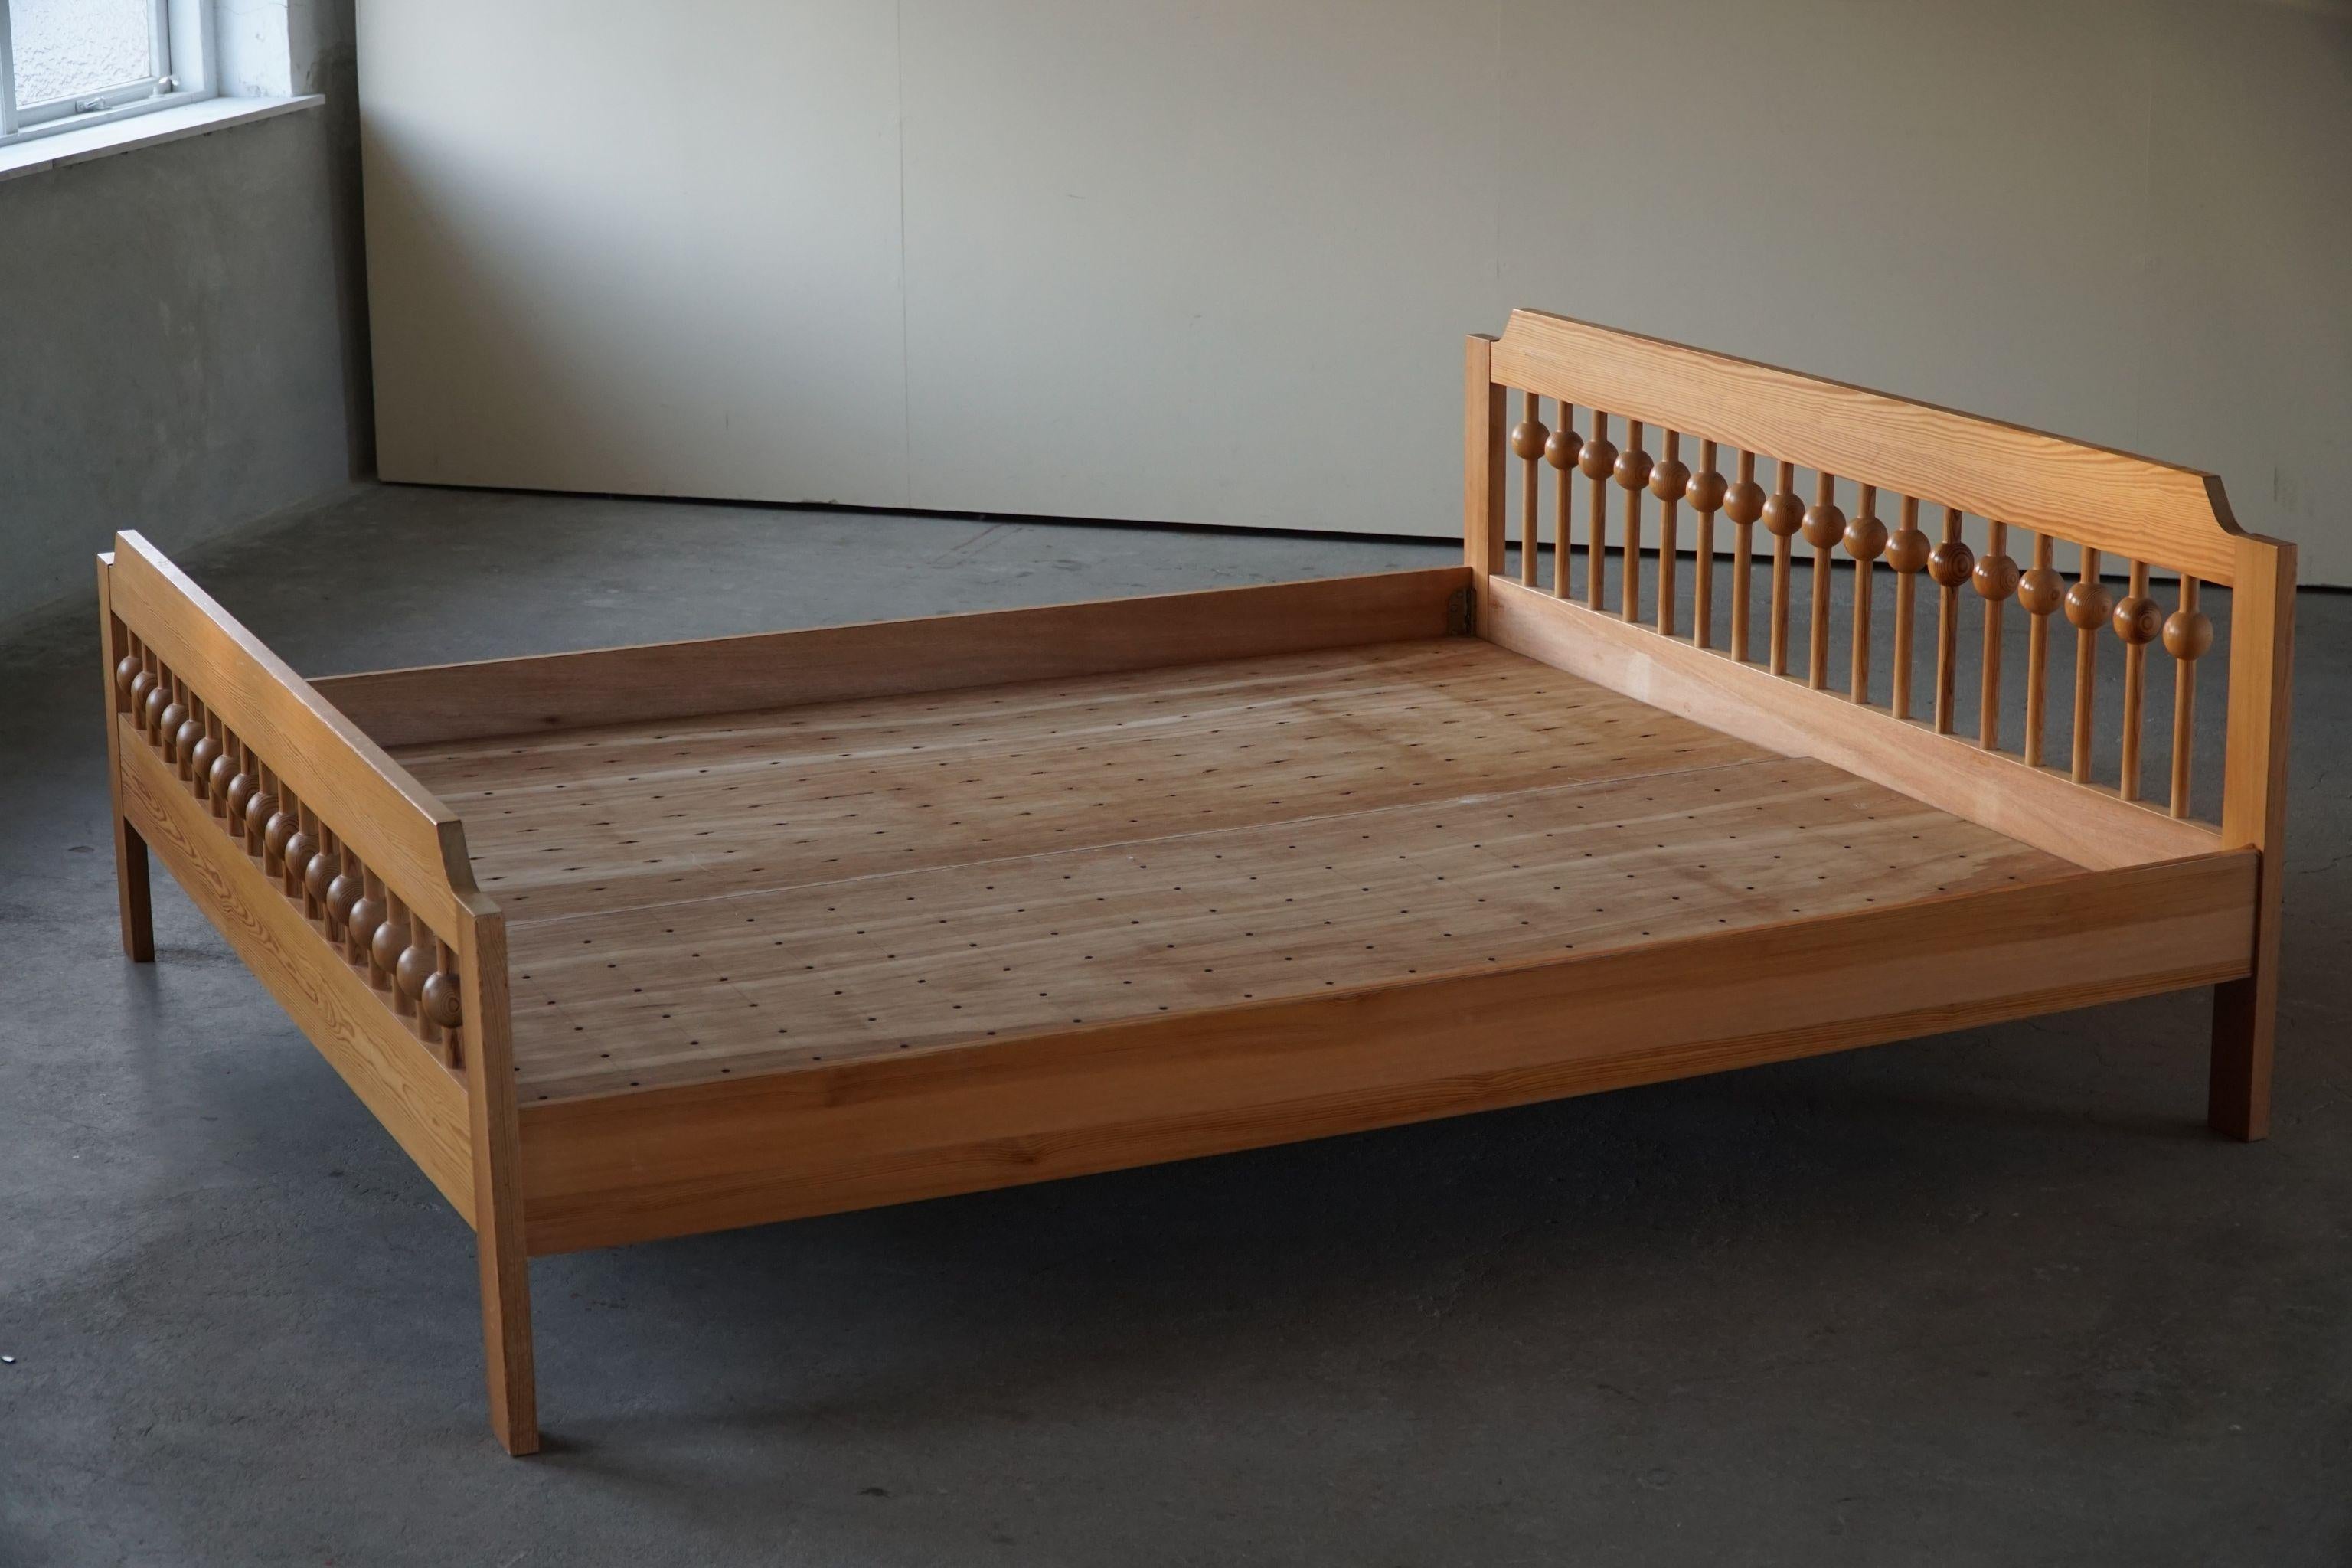 Swedish Modern Sculptural Bed in Pine, Made by Sven Larsson, 1960s For Sale 9